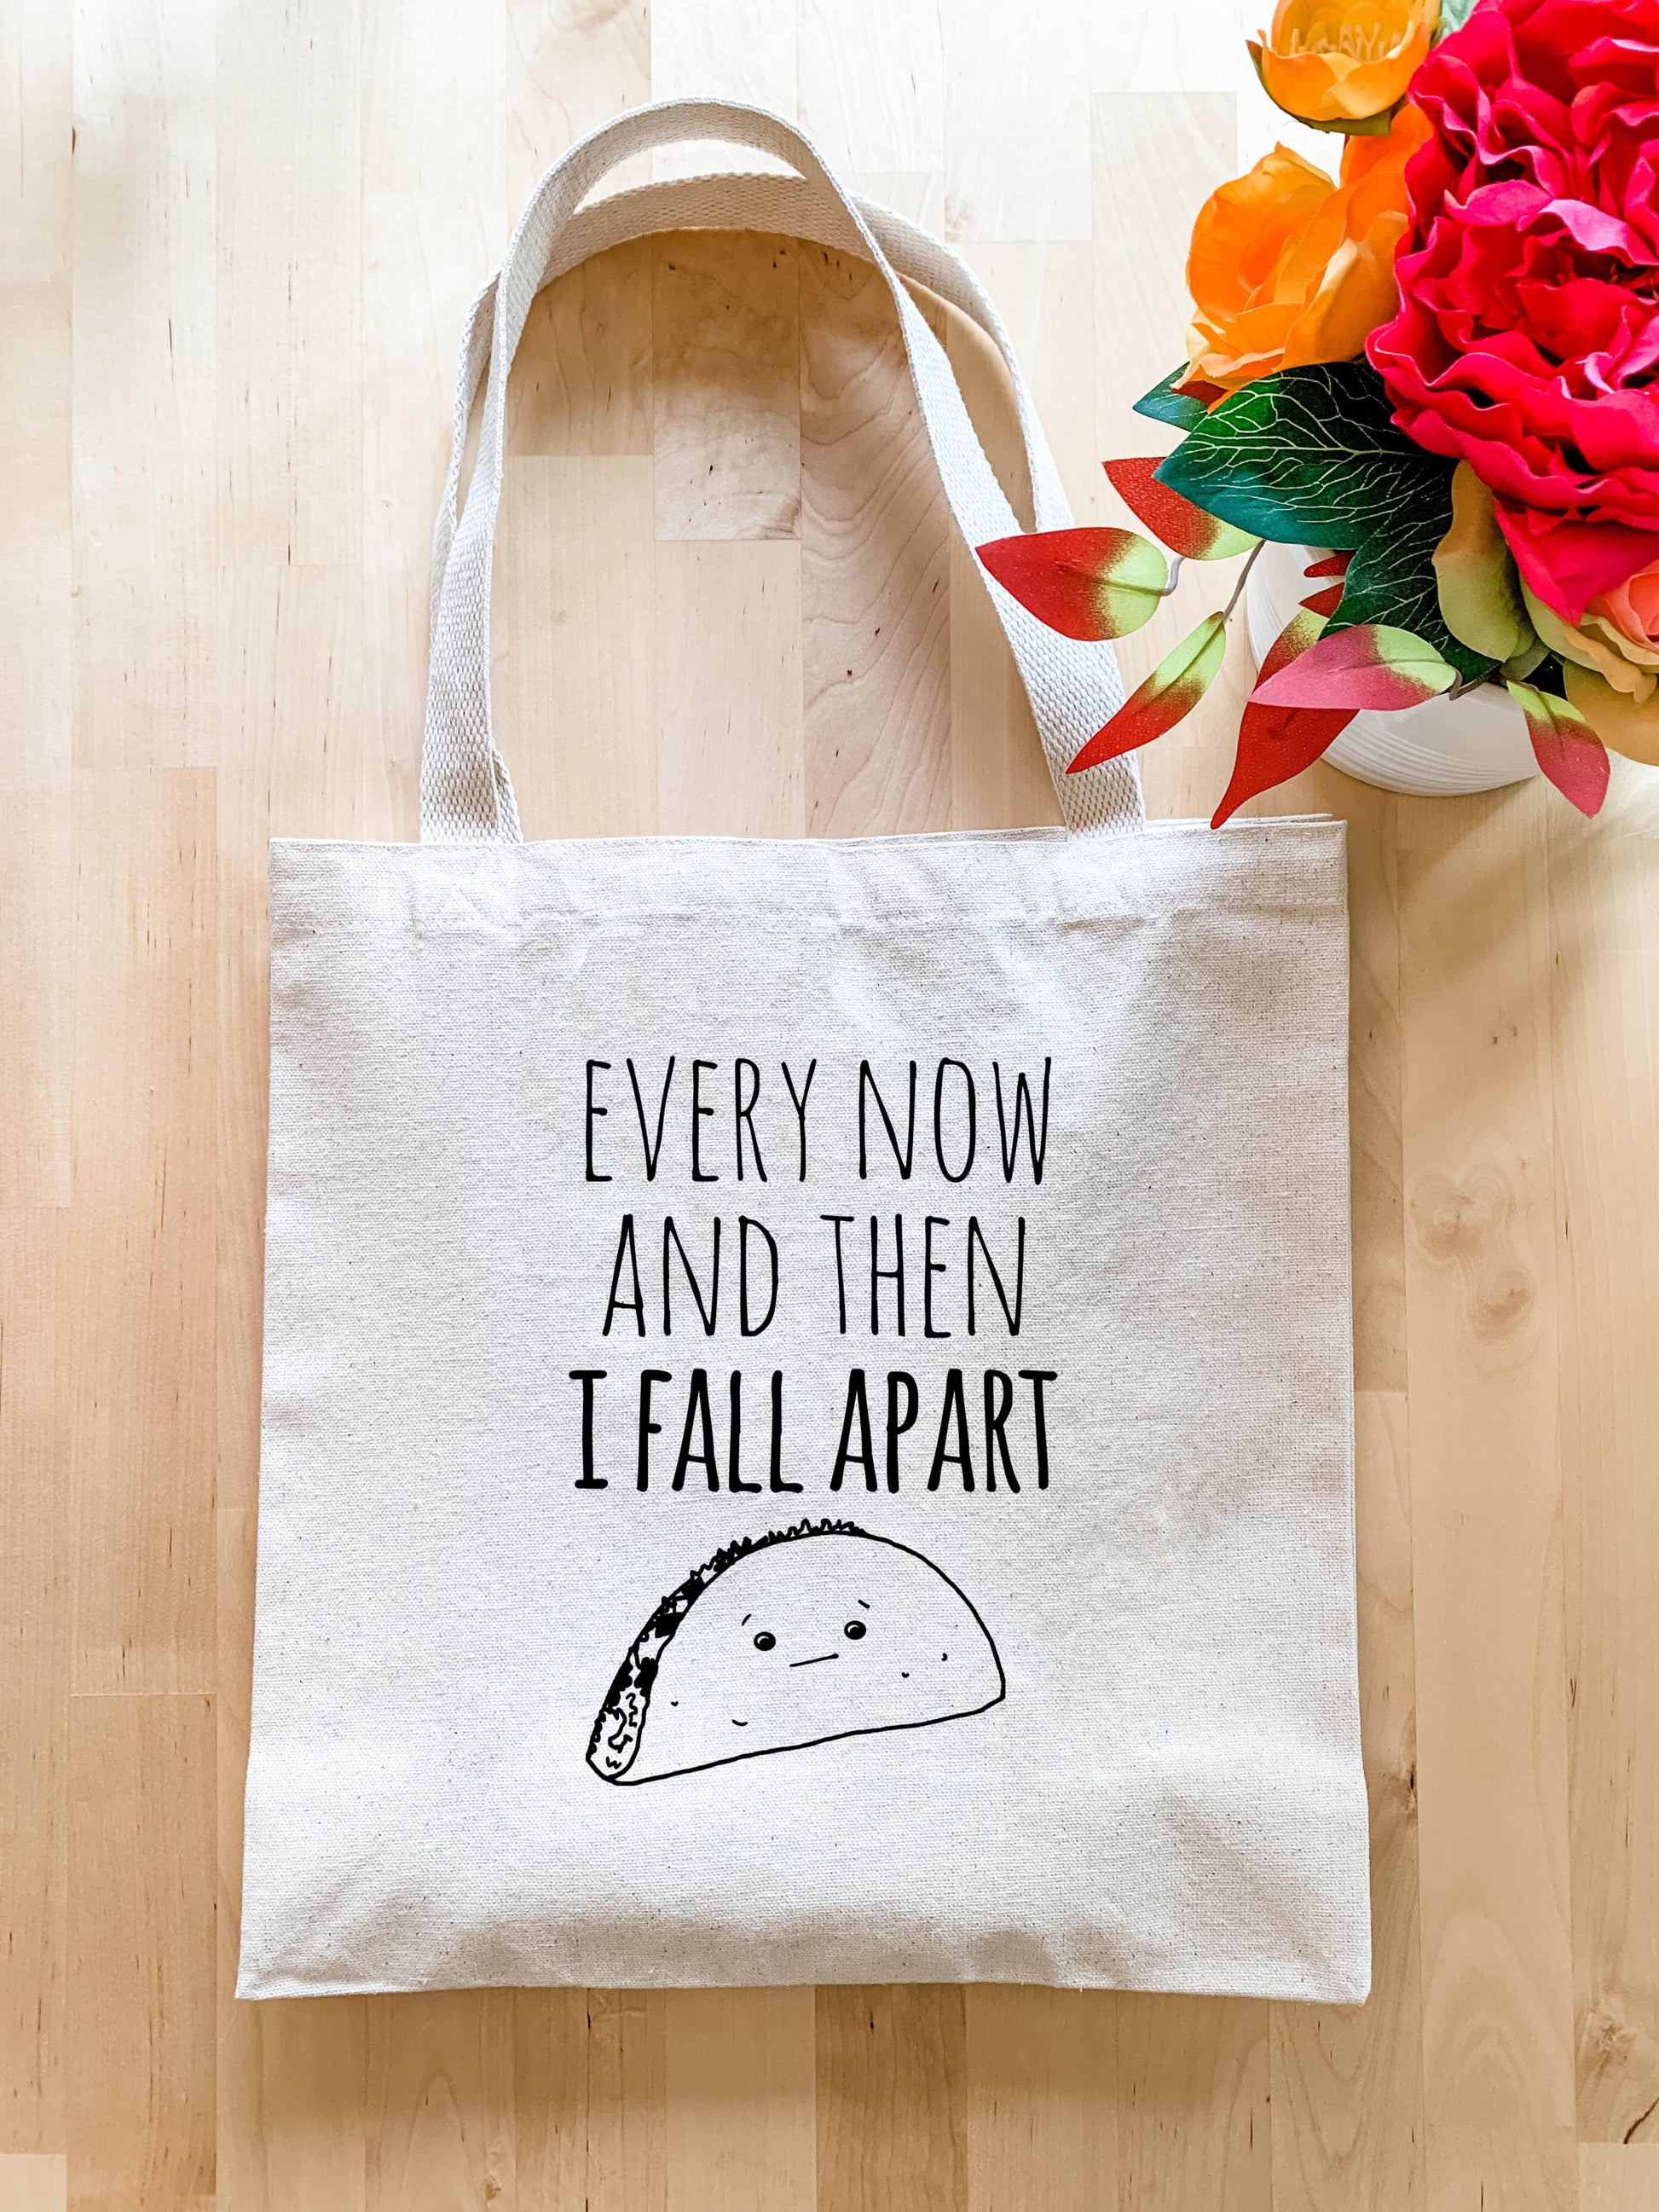 Every Now And Then I Fall Apart (Taco) - Tote Bag - MoonlightMakers